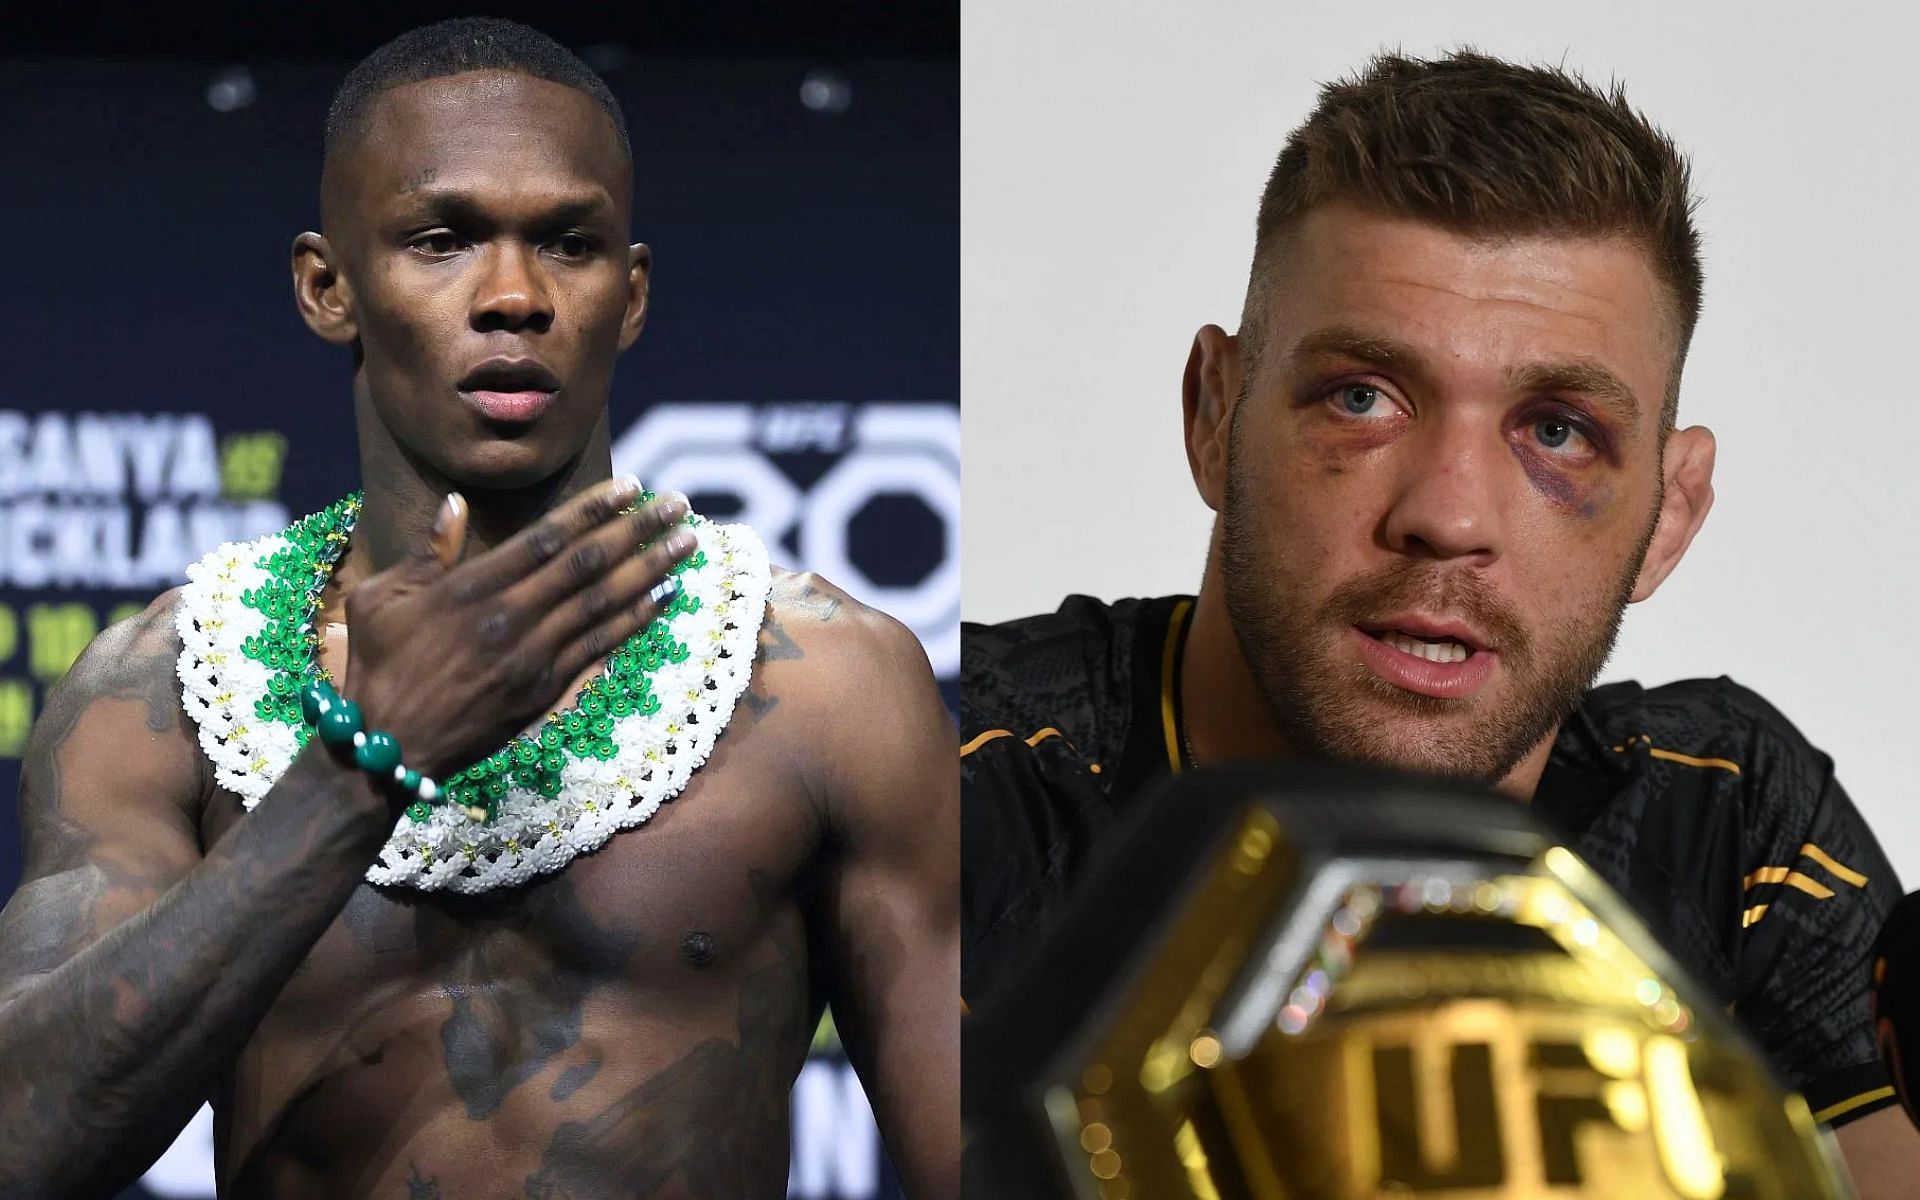 Dricus du Plessis (right) opens up on perceived bad blood with Israel Adesanya (left) [Images Courtesy: @GettyImages]